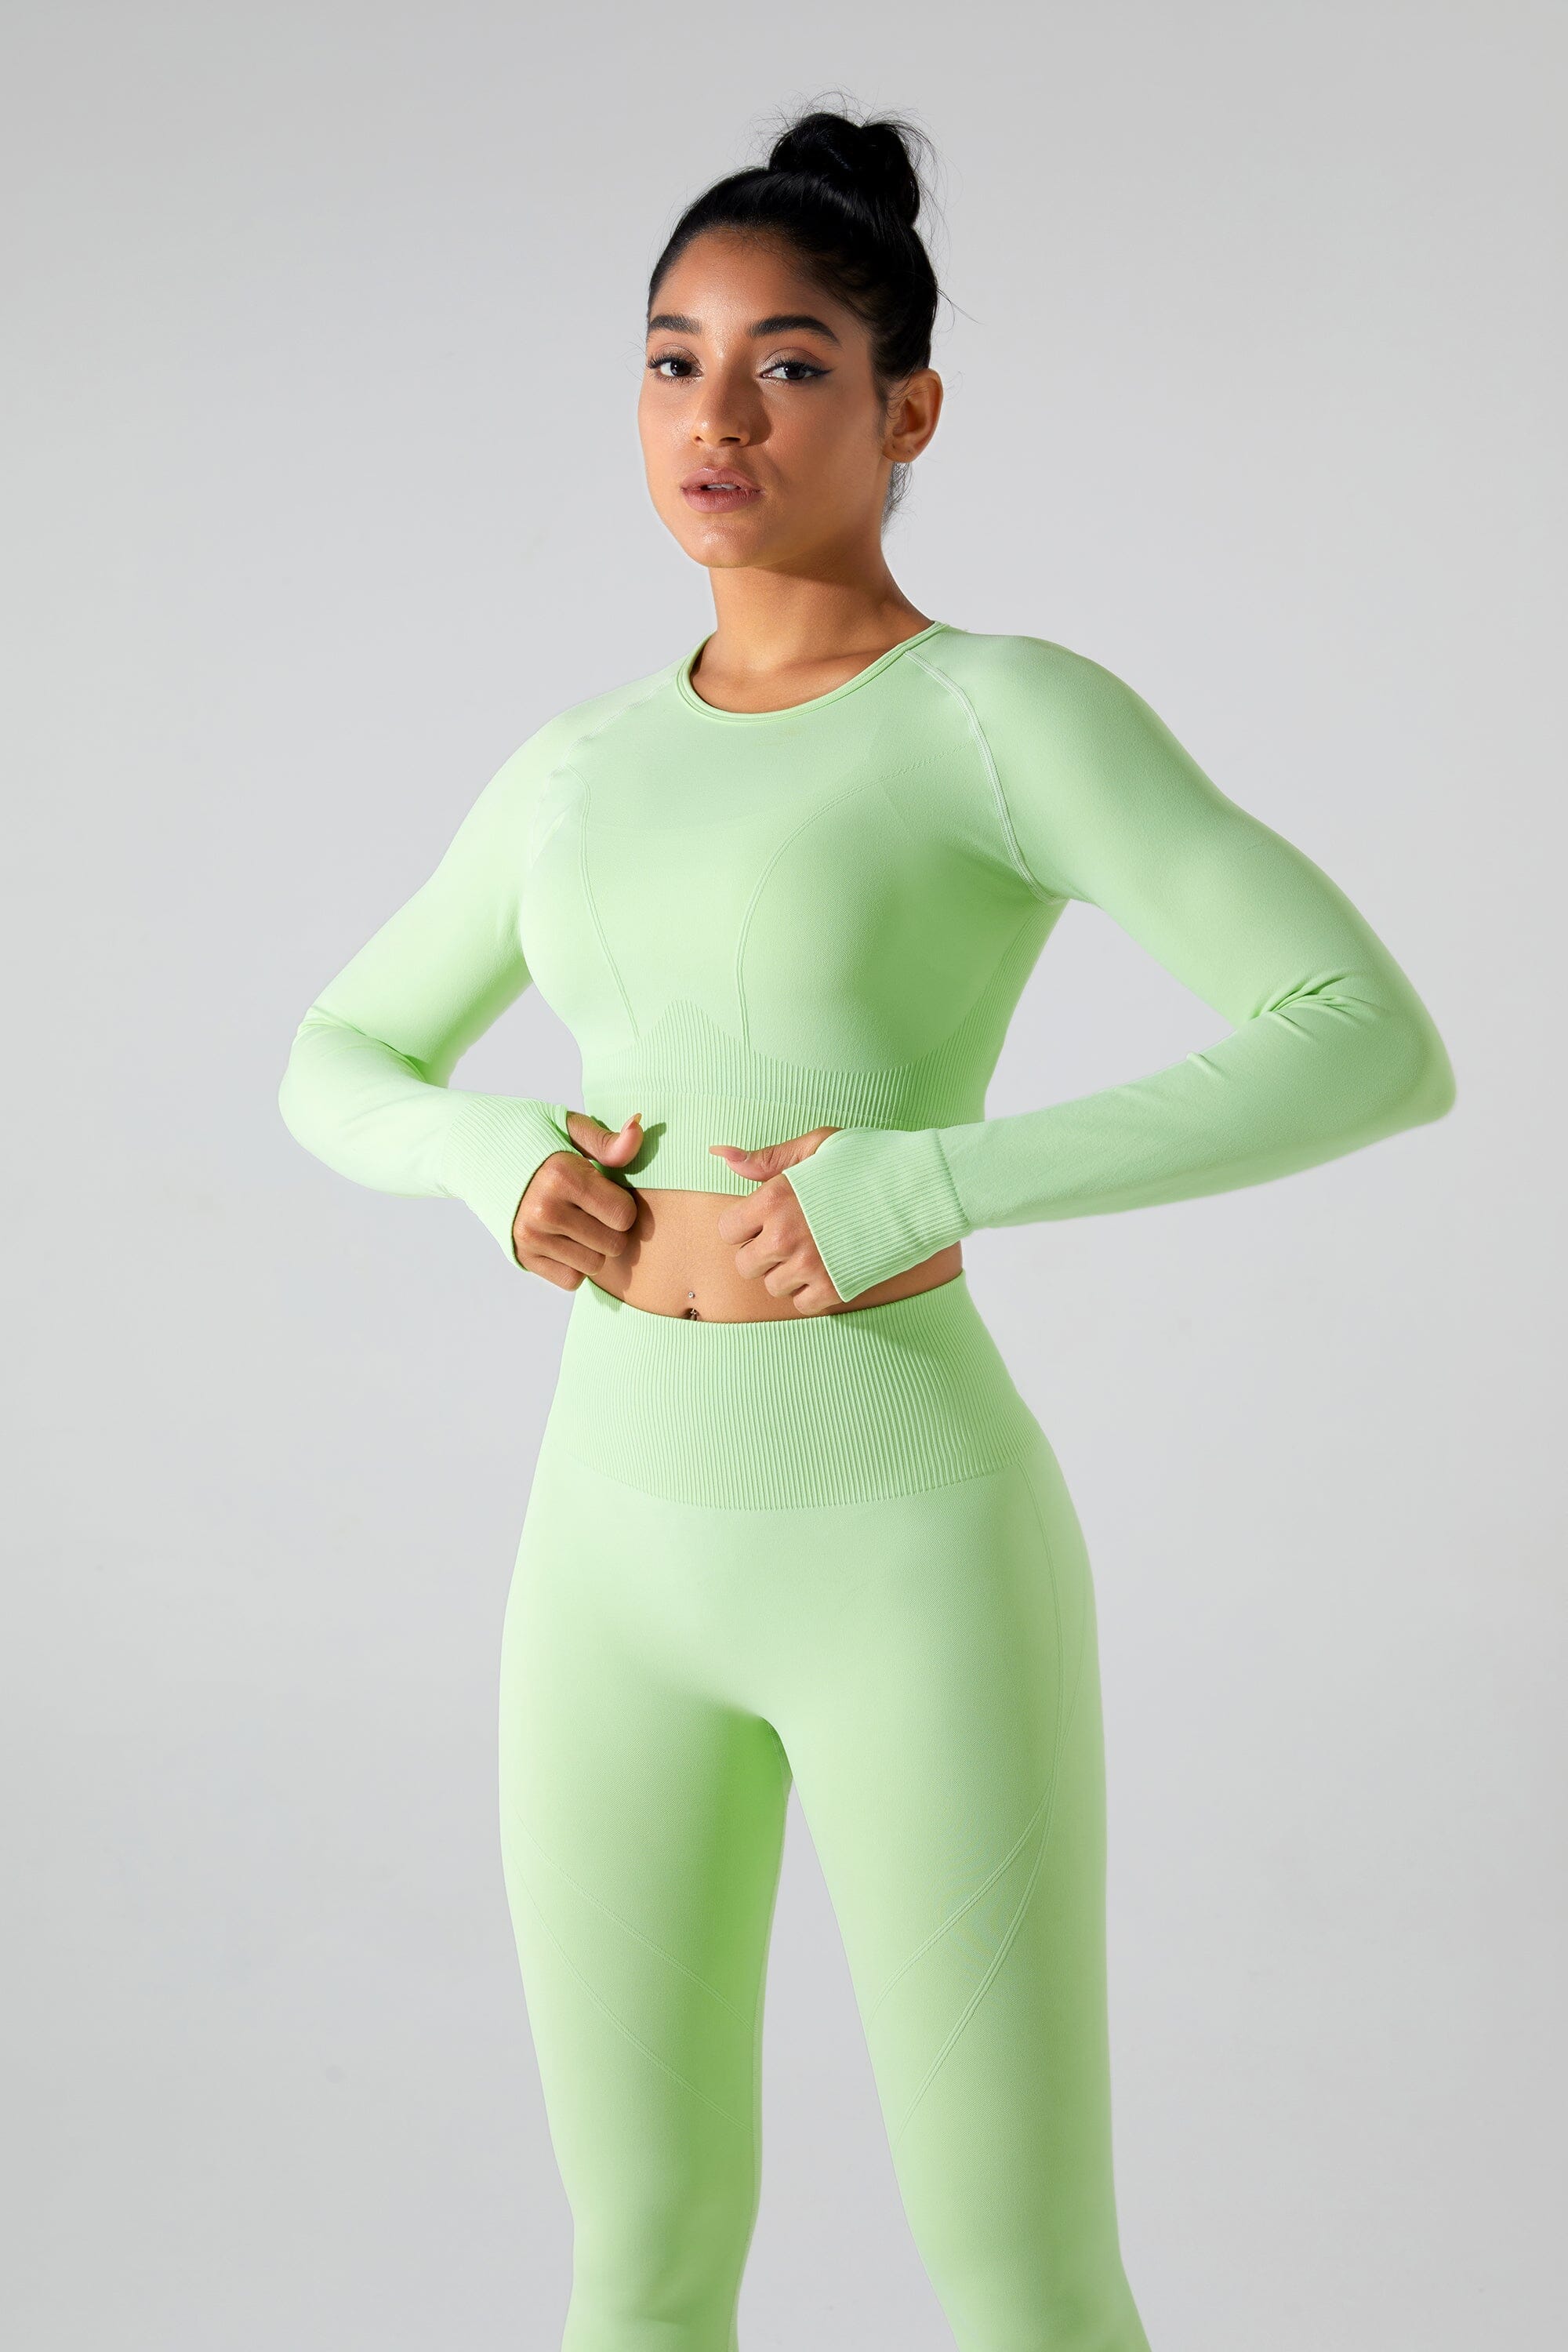 Eclipse Seamless Top Top Starlethics Green S 